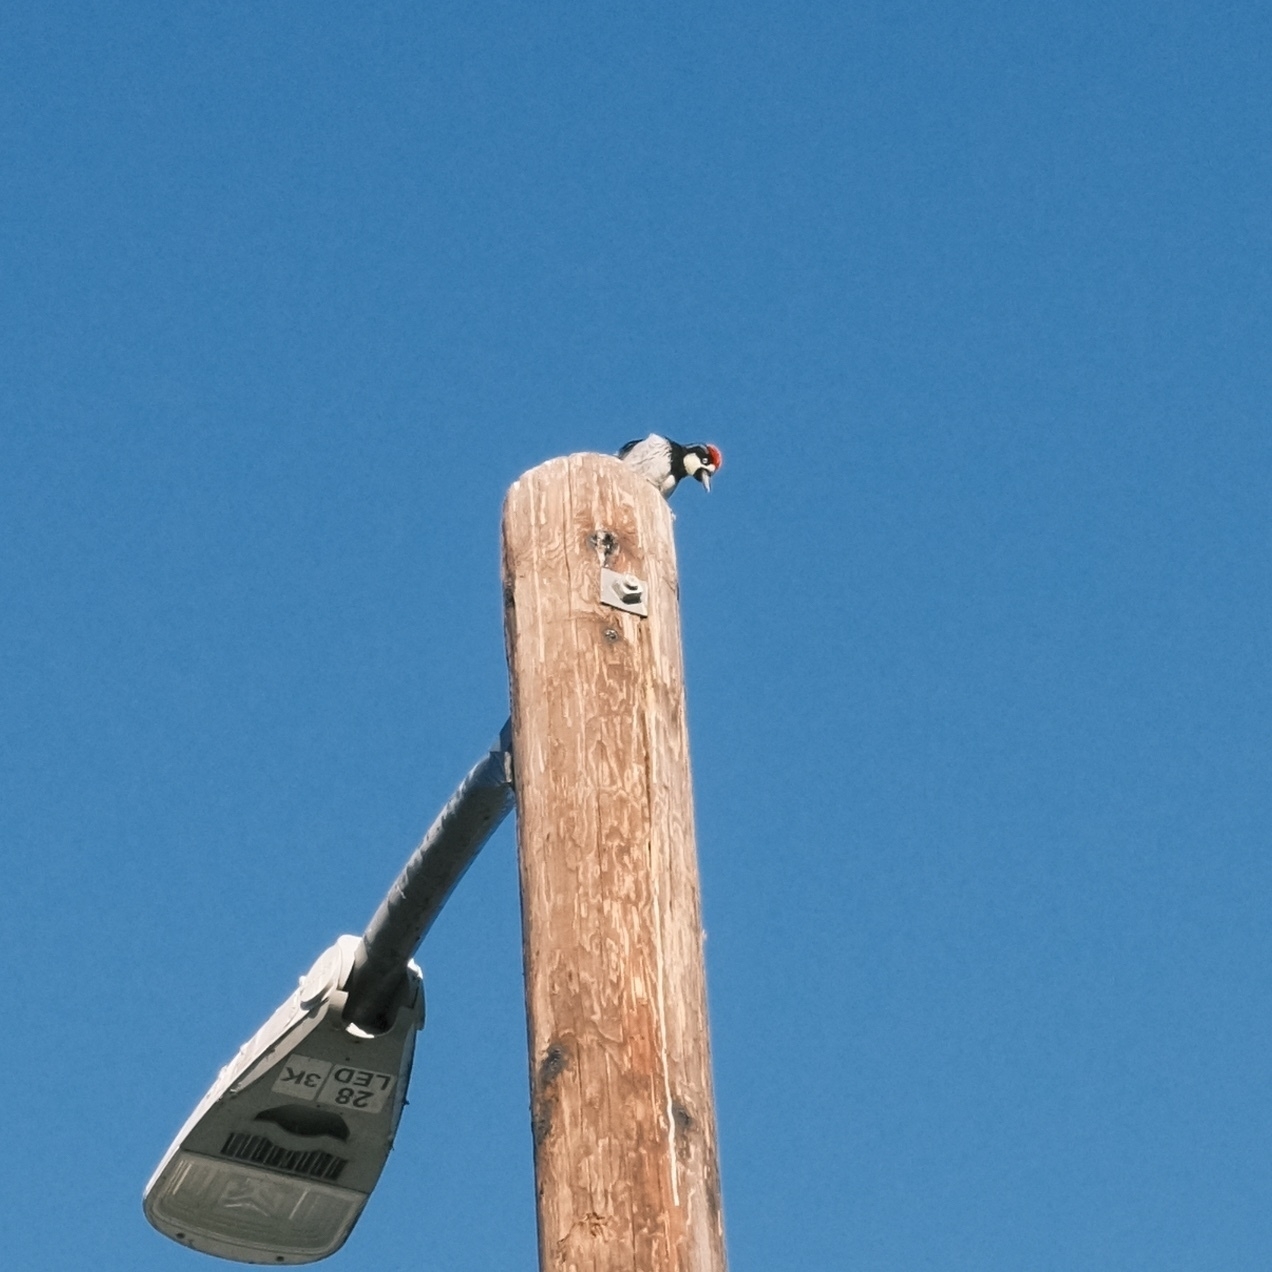 red headed & black body acorn woodpecker laughing atop a light pole against a clear blue sky